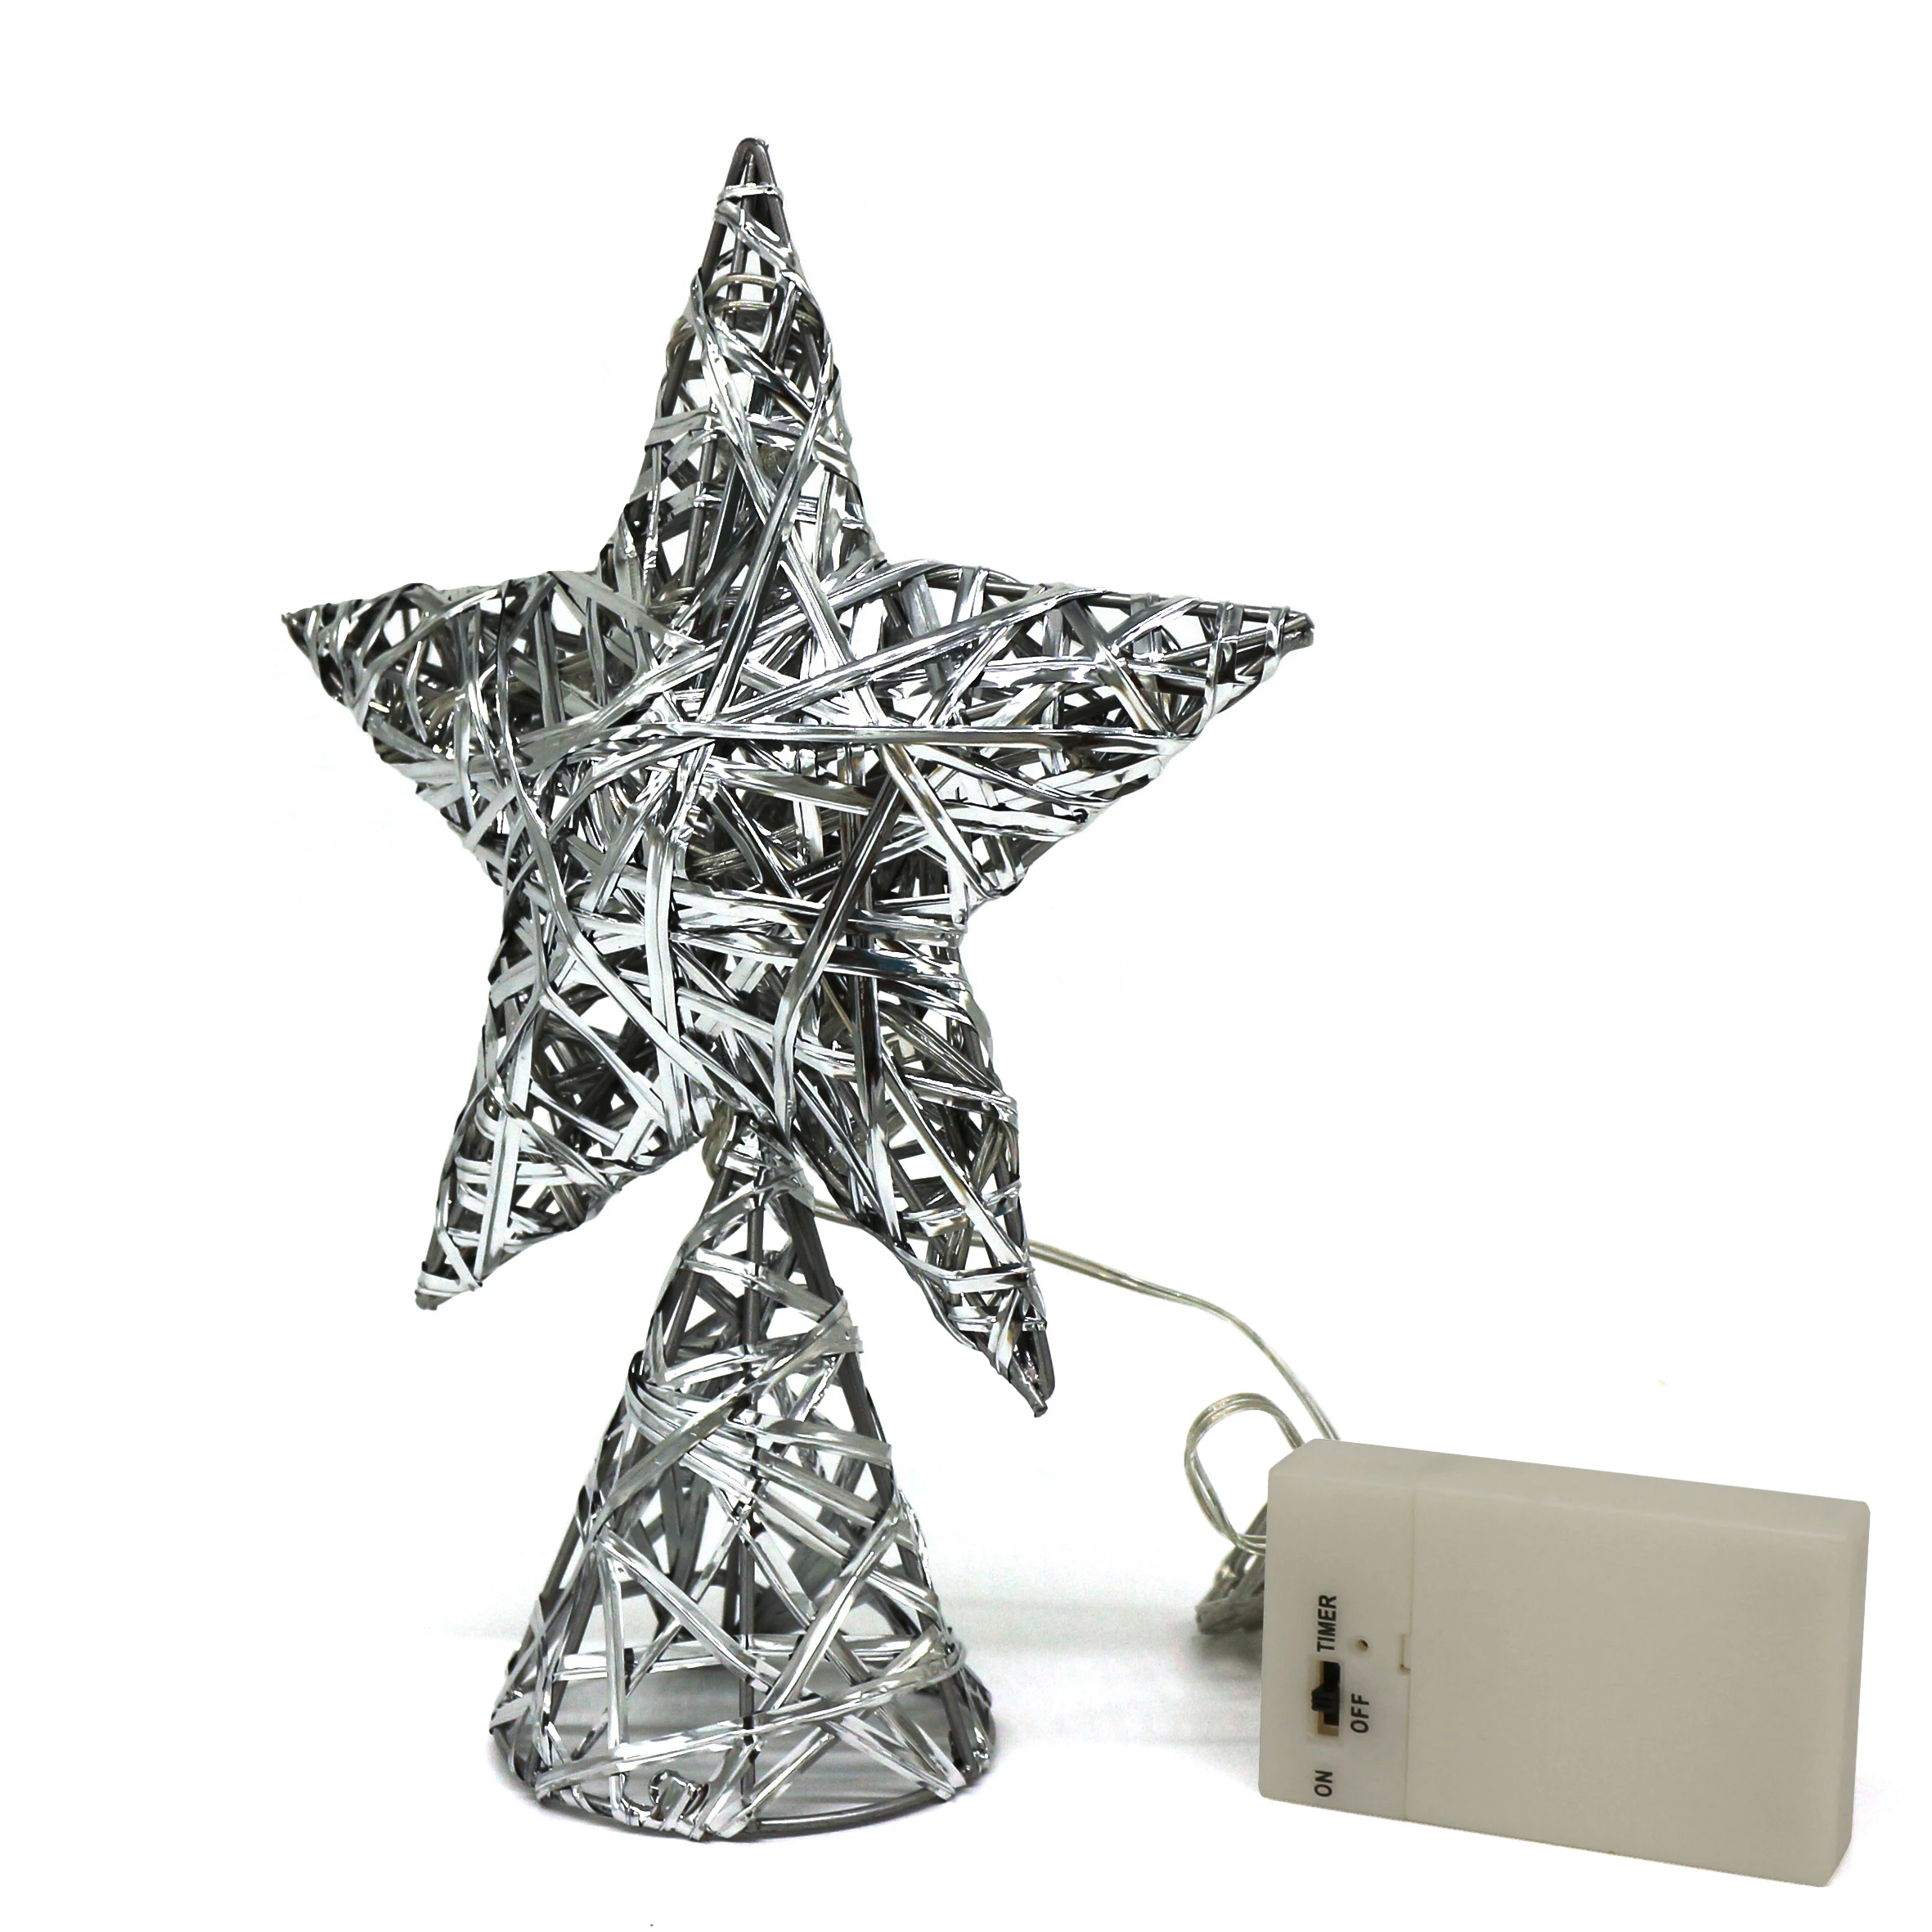 

Silver Tree Top Star with Timer Warm White LED 10-Lights (Three Functions) for Christmas Ornaments